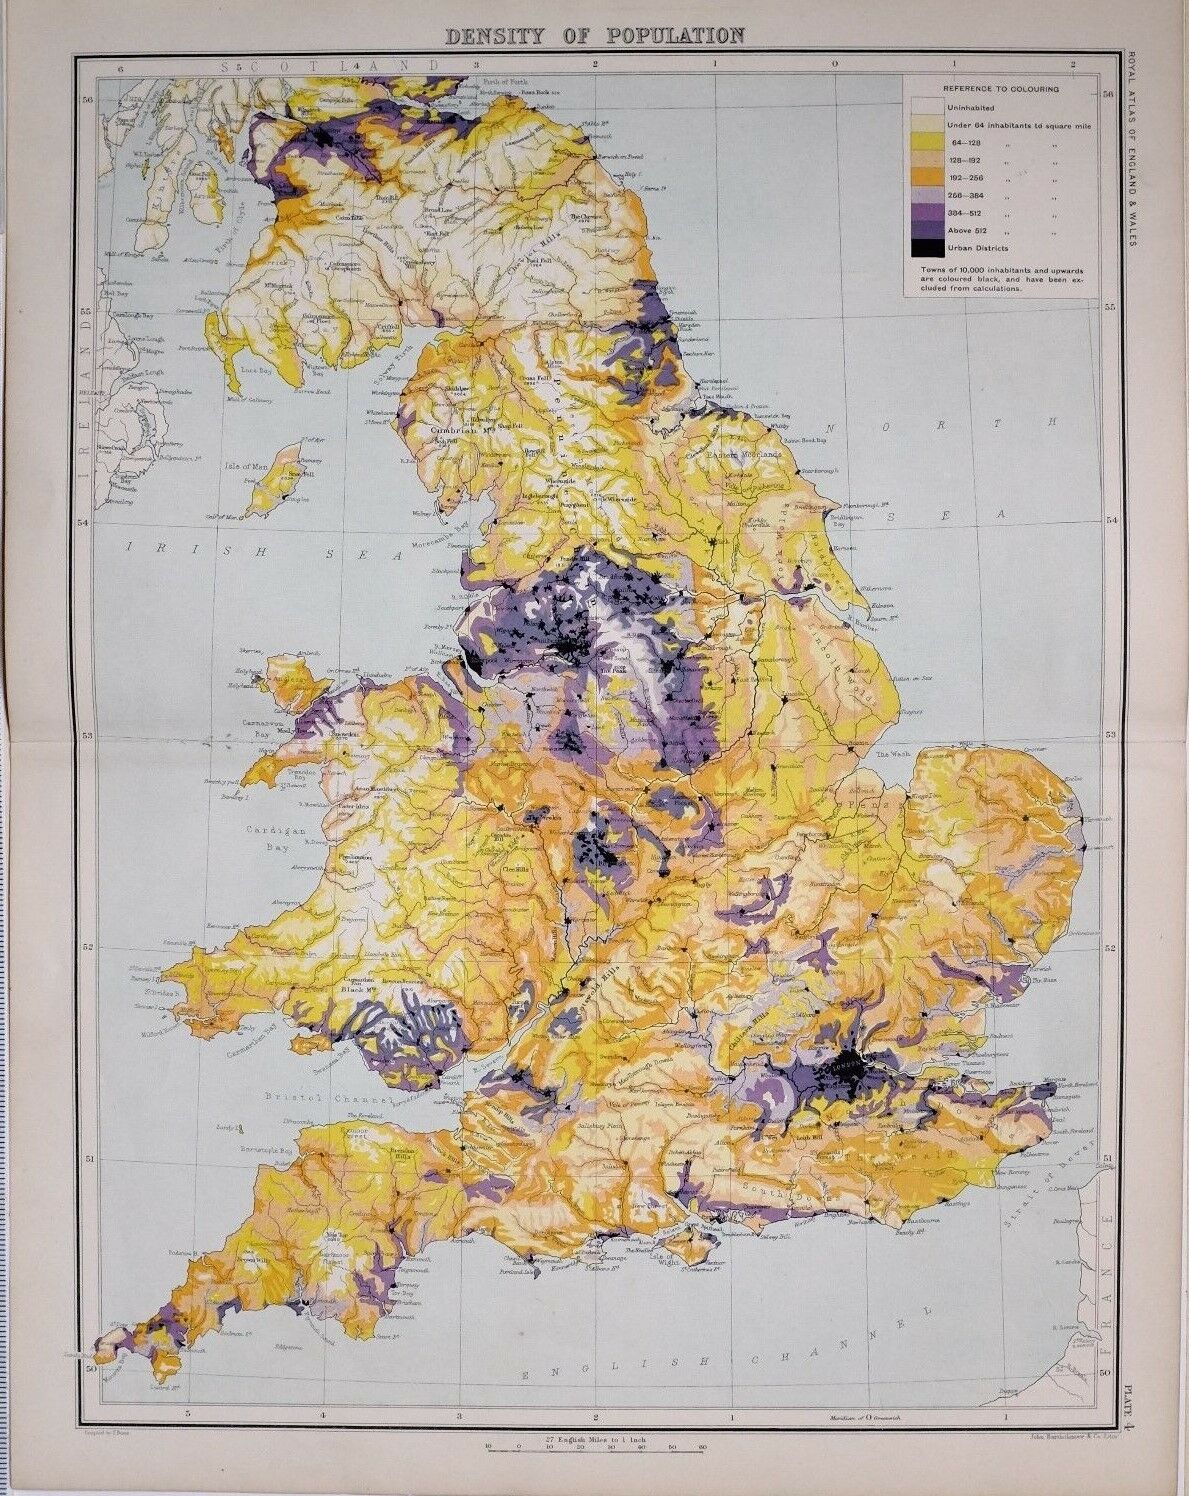 Victorian Antique 1897 Map Density of Population England & Wales.